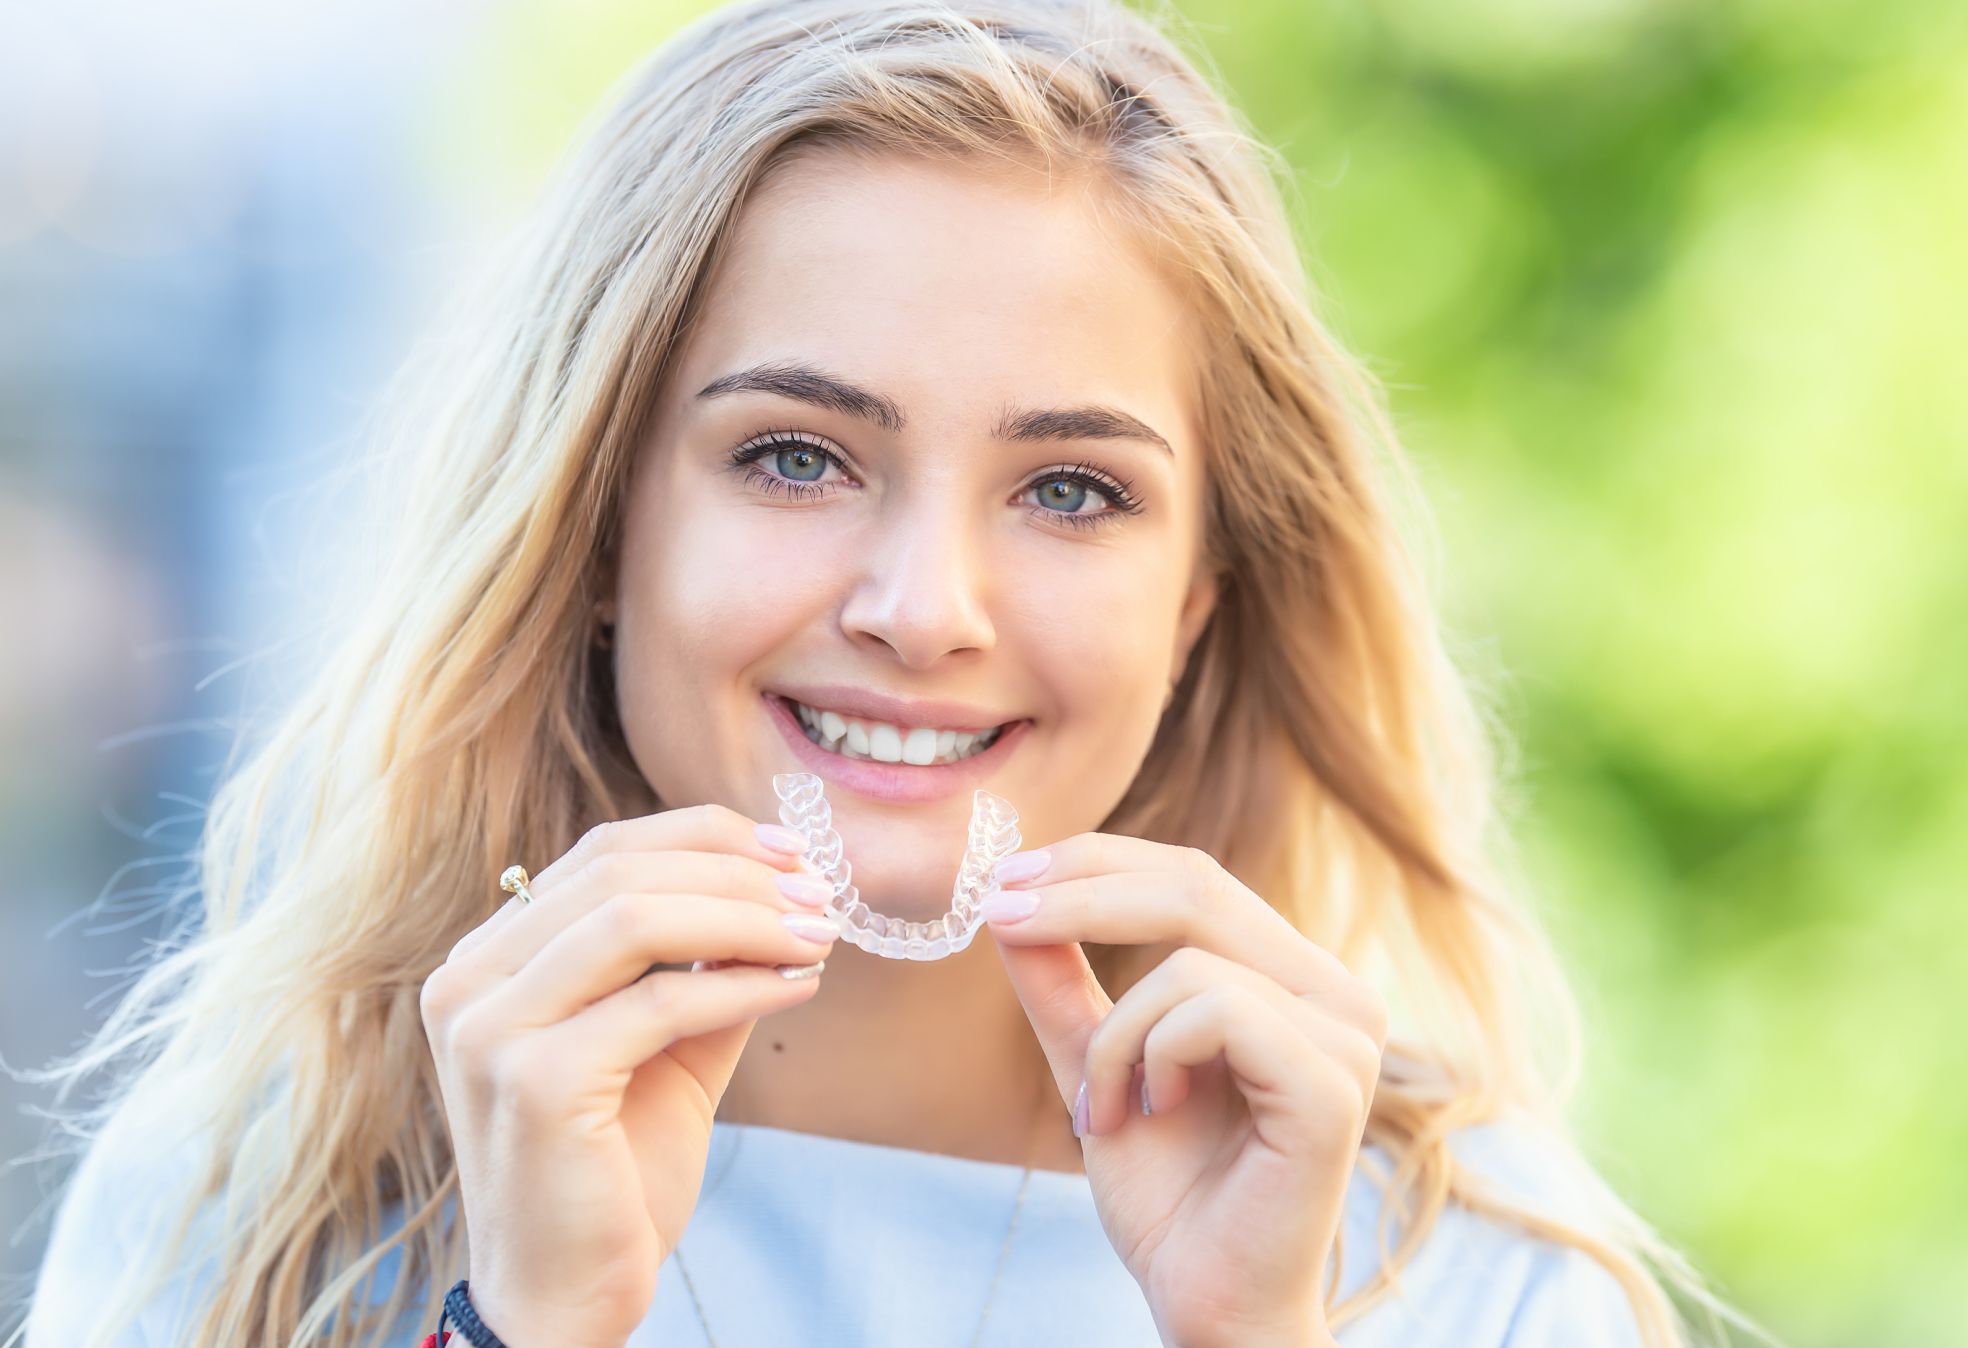 A smiling teenage girl with holding an Invisalign orthodontic tray.